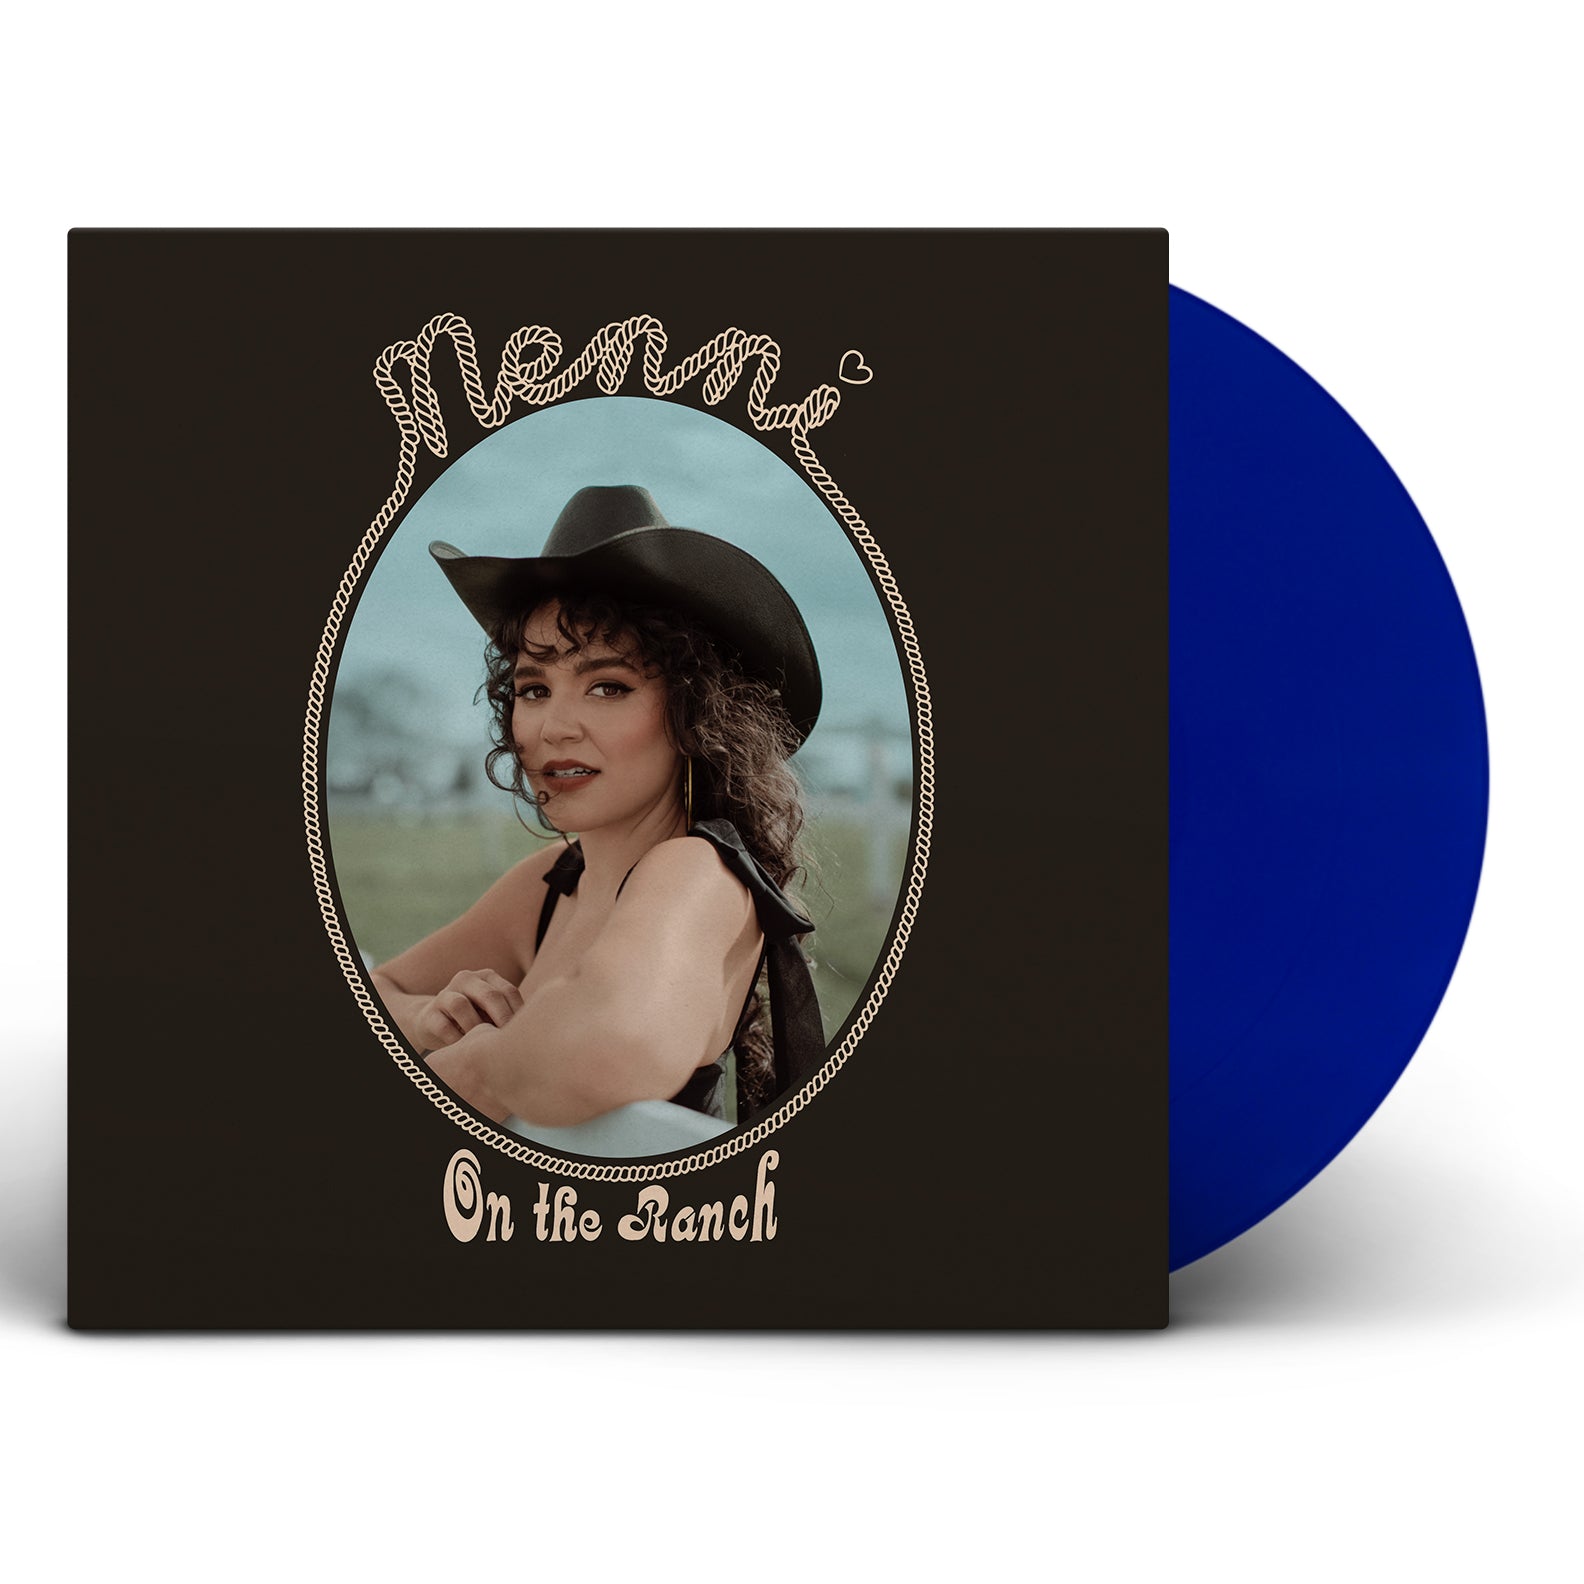 Emily Nenni - On The Ranch [Color Vinyl]